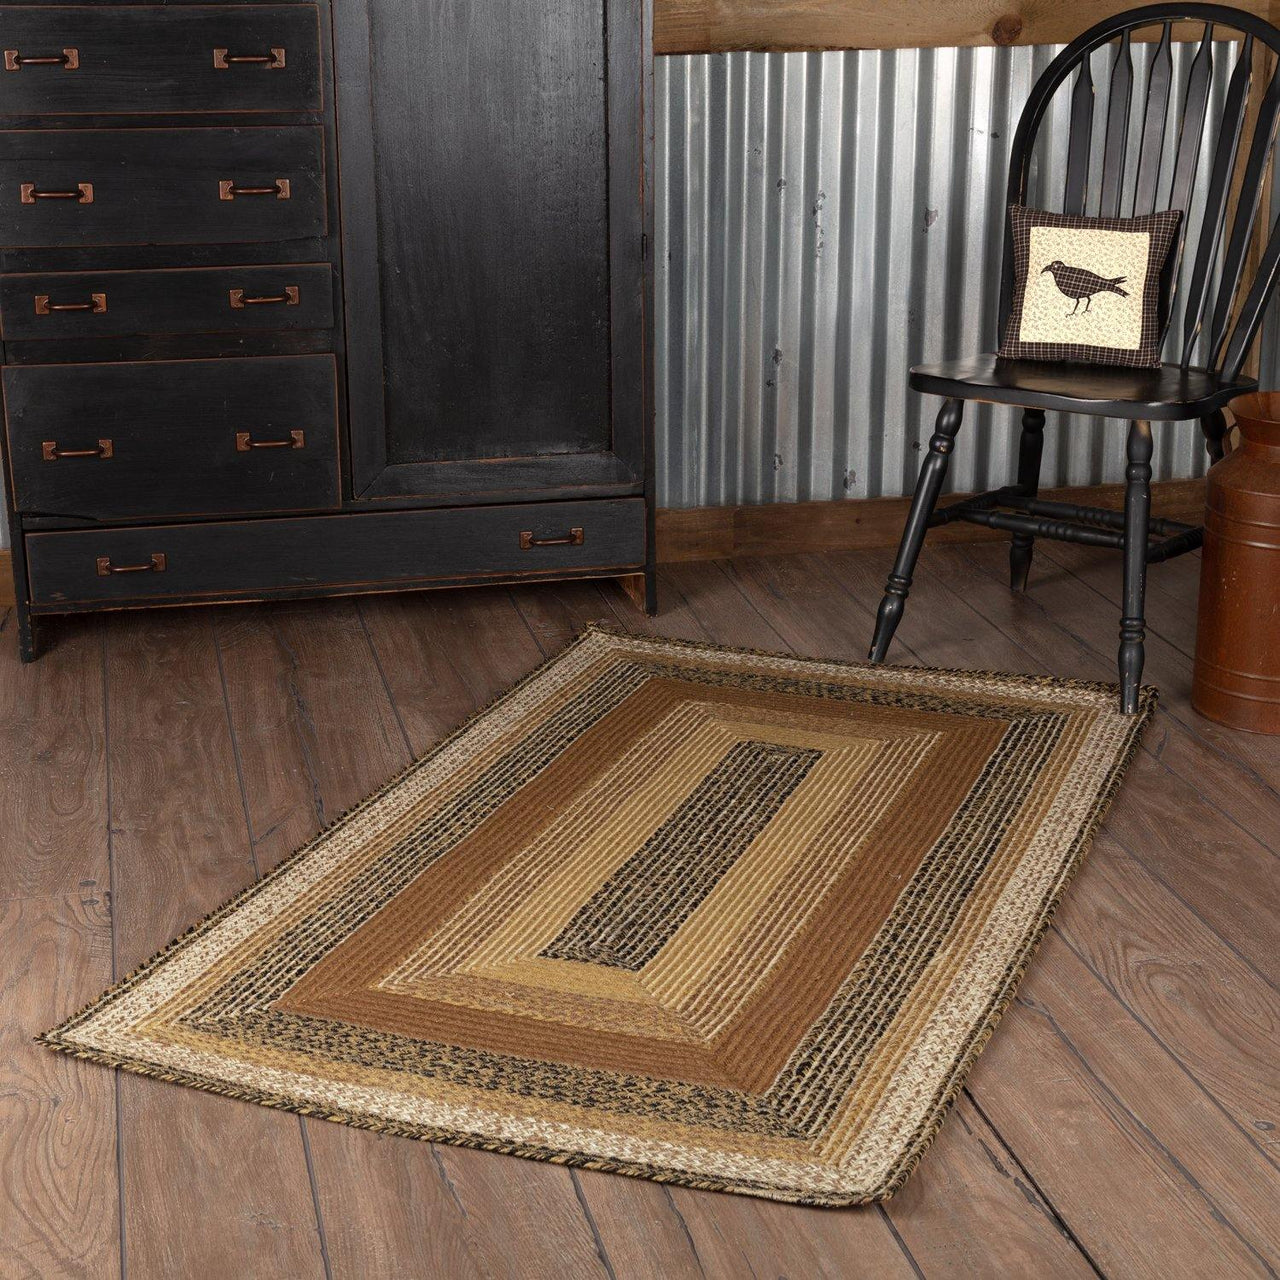 Kettle Grove Jute Braided Rug Rect 20"x30" with Rug Pad VHC Brands - The Fox Decor